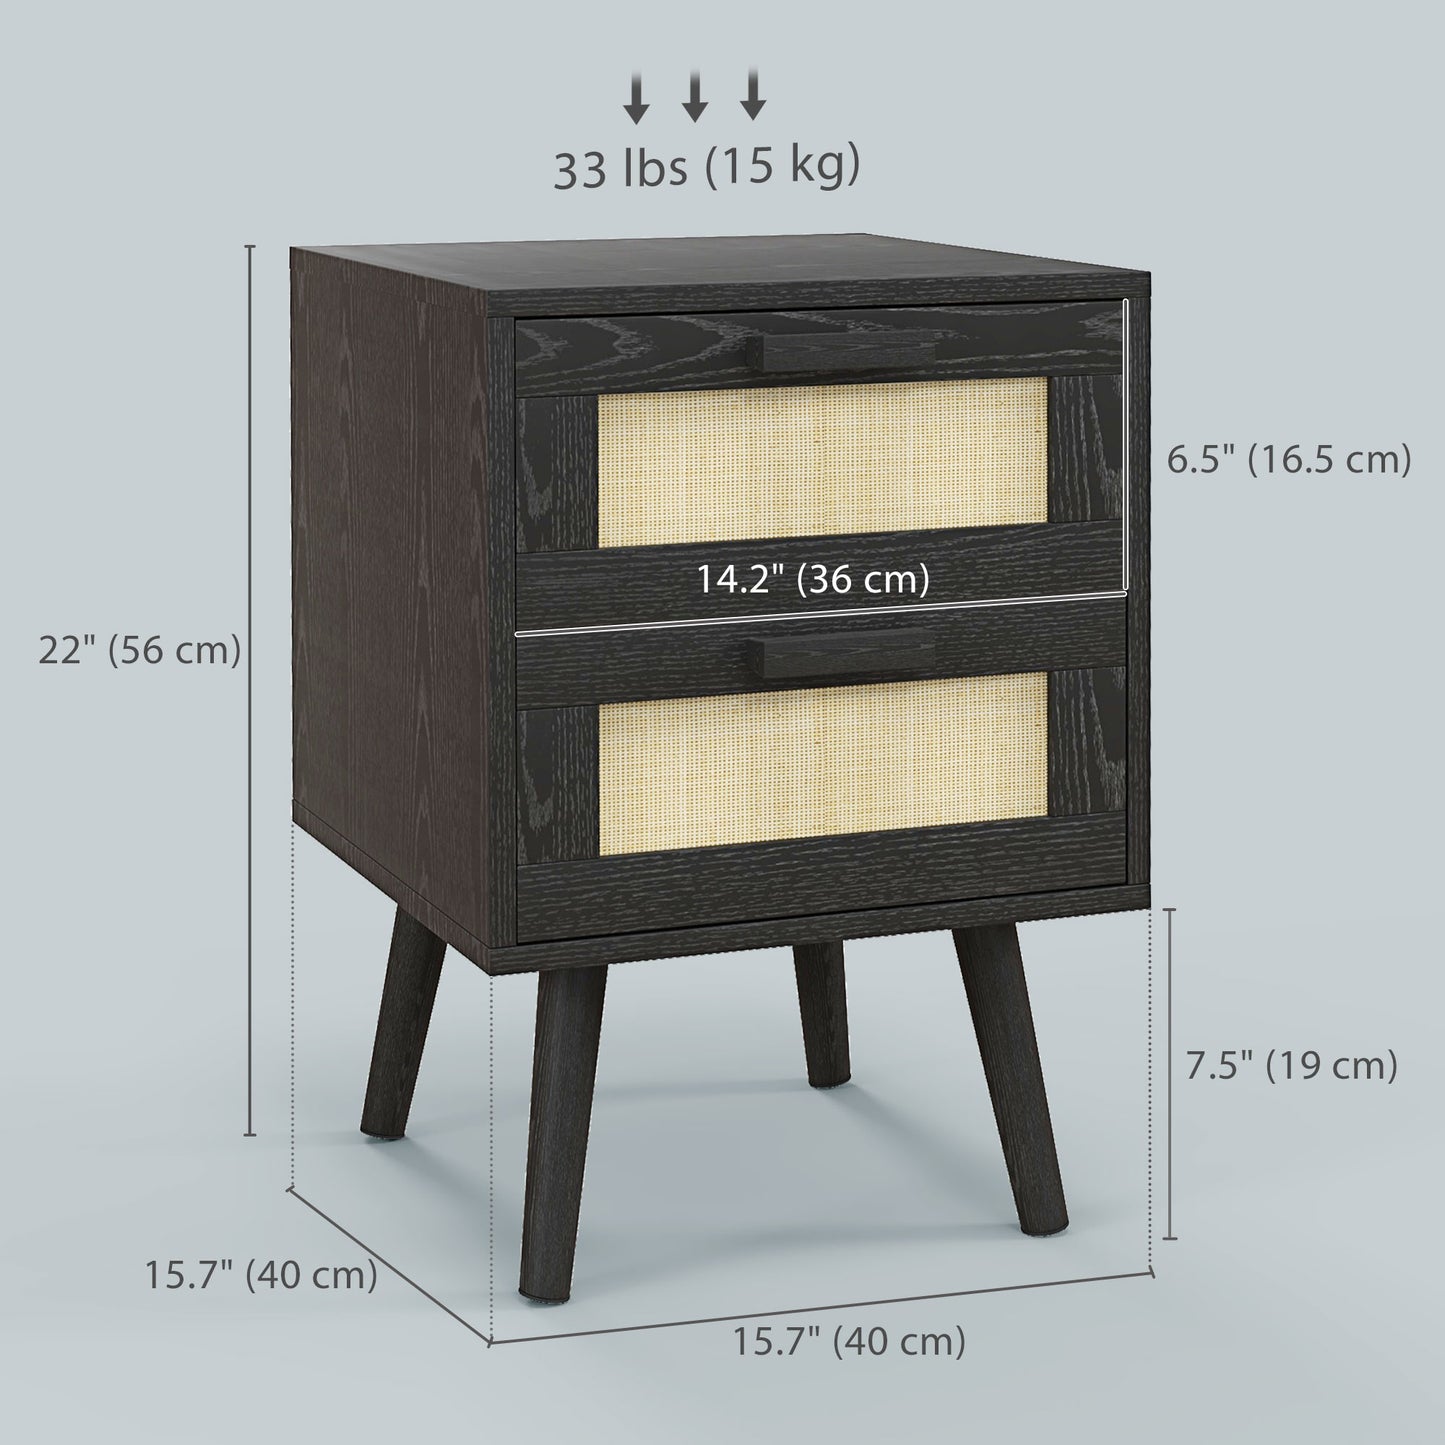 Soho Nightstands Set of 2, Bedside Tables with 2 Drawers for Living Room, Bedroom, Black Bedside Tables   at Gallery Canada